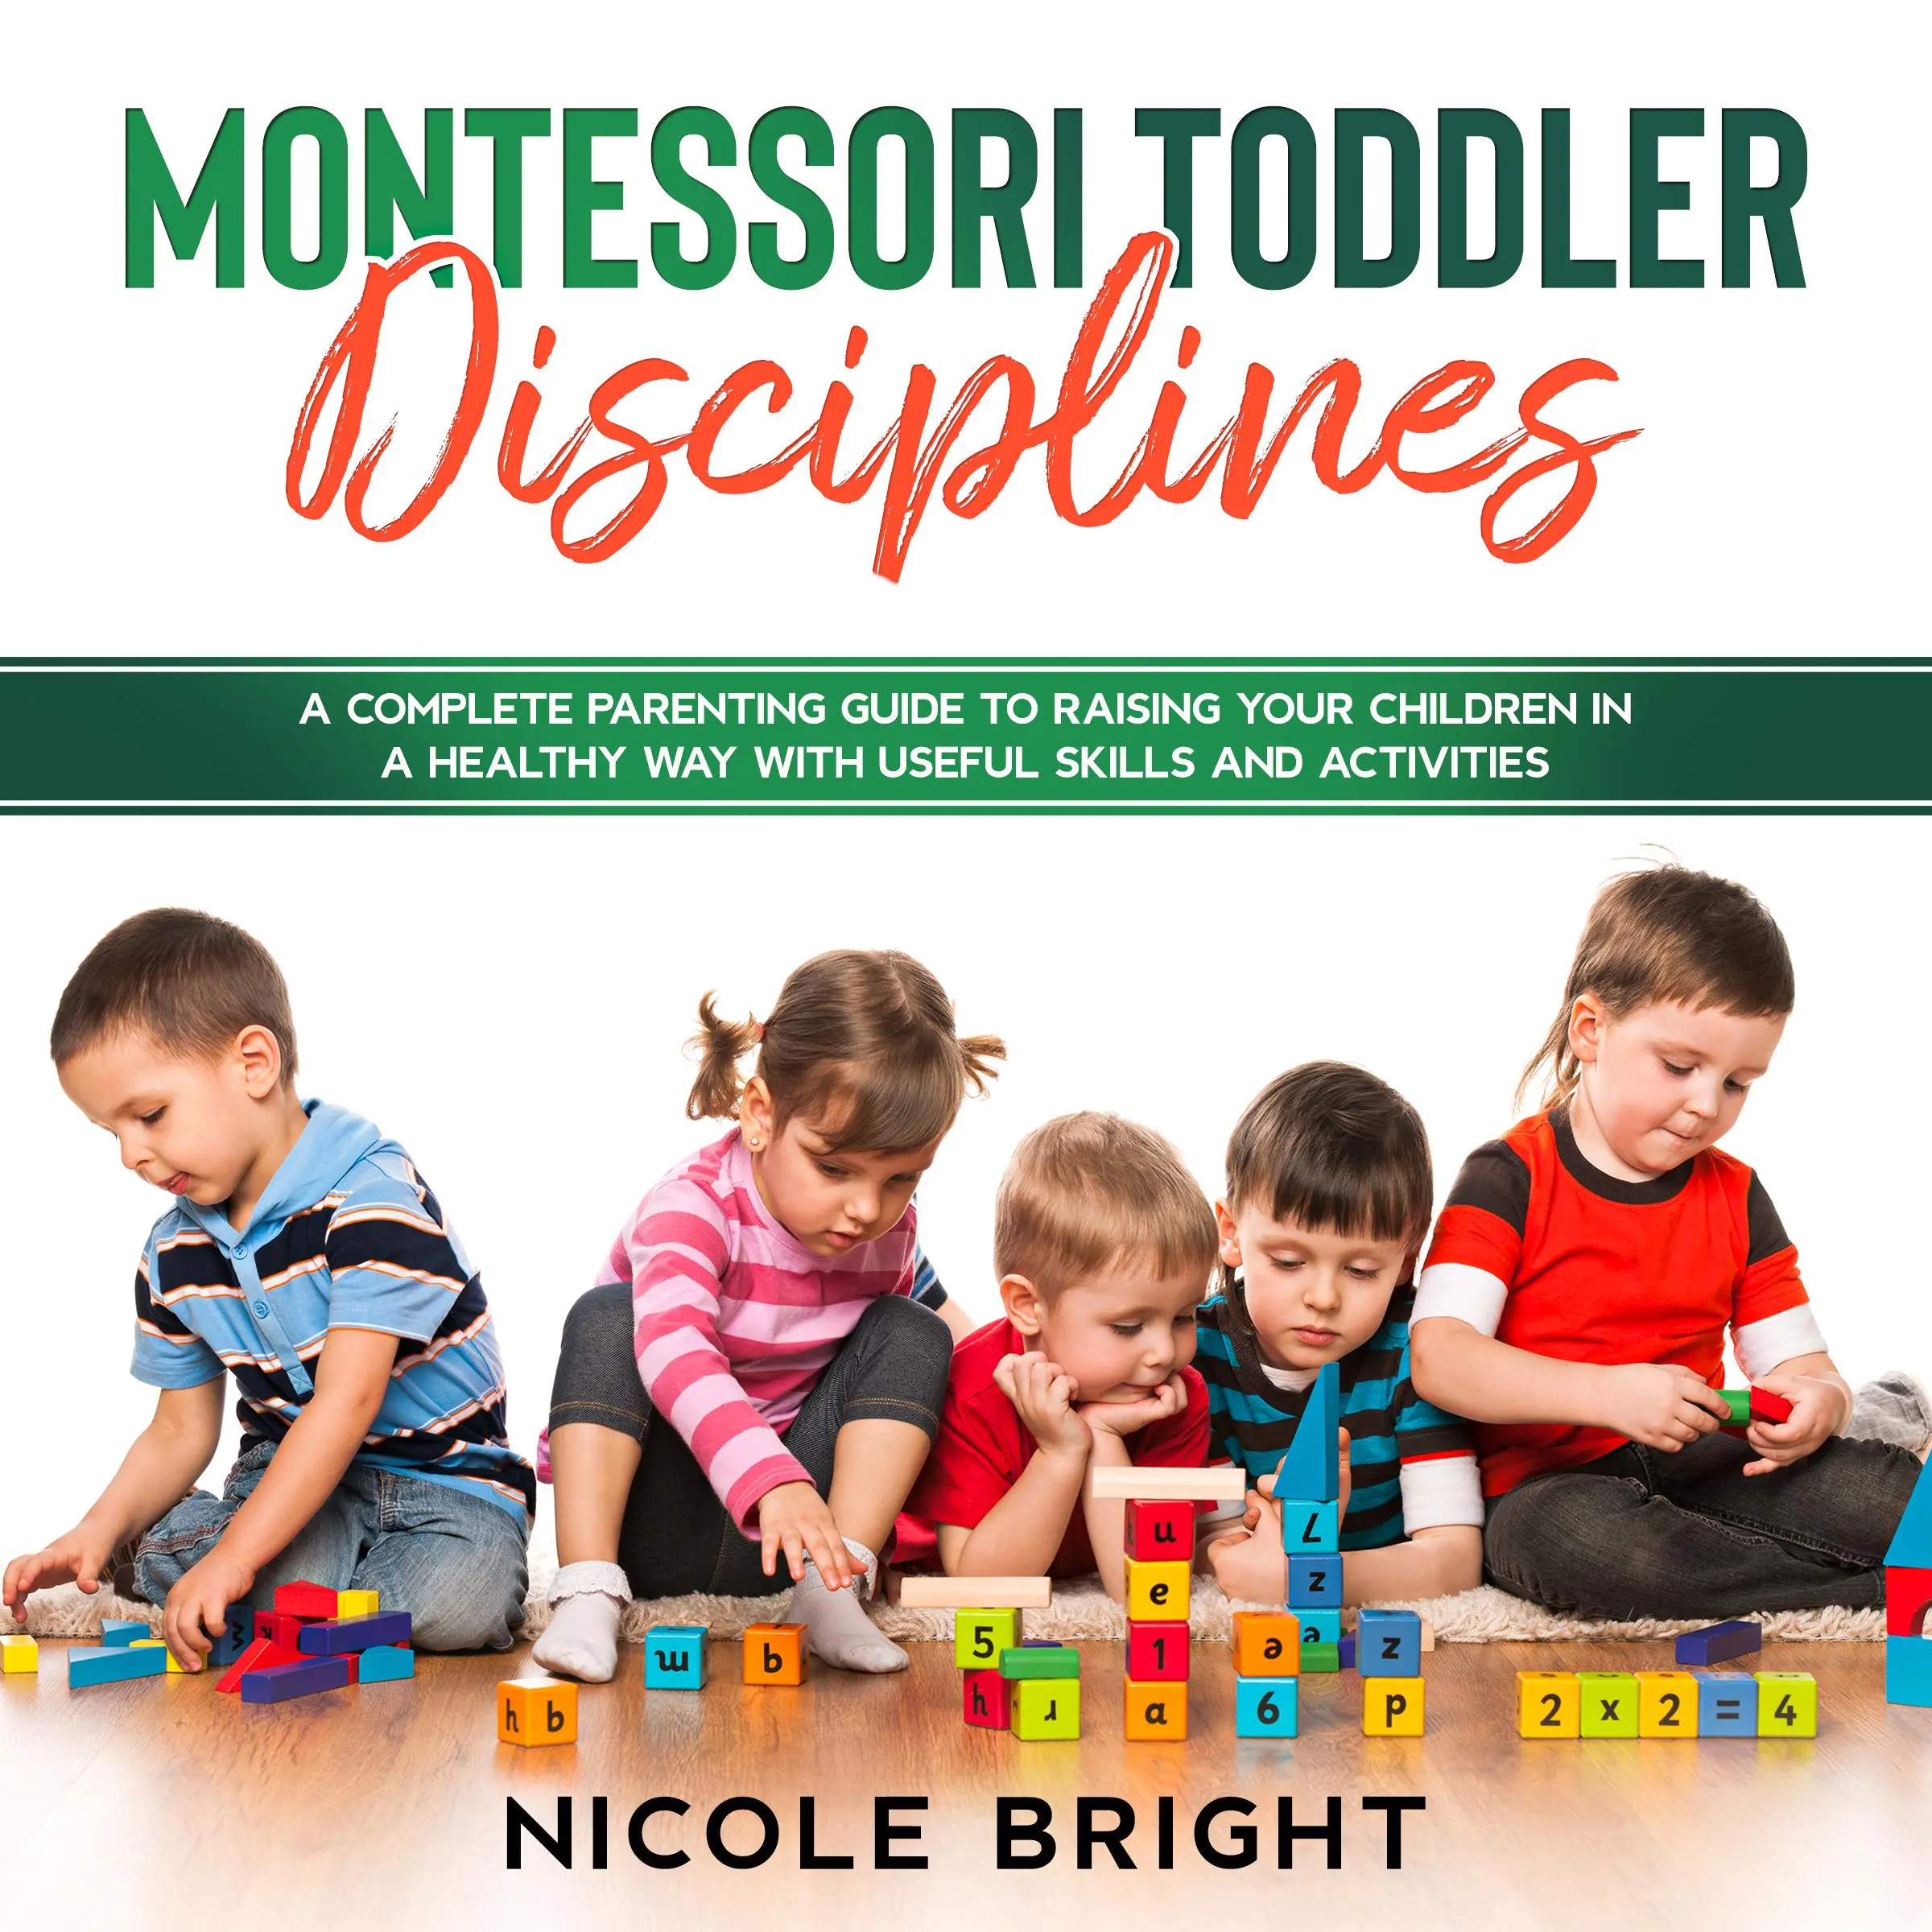 Montessori Toddler Disciplines: A Complete Parenting Guide to Raising your Children in a Healthy Way with Useful Skills and Activities Audiobook by Nicole Bright